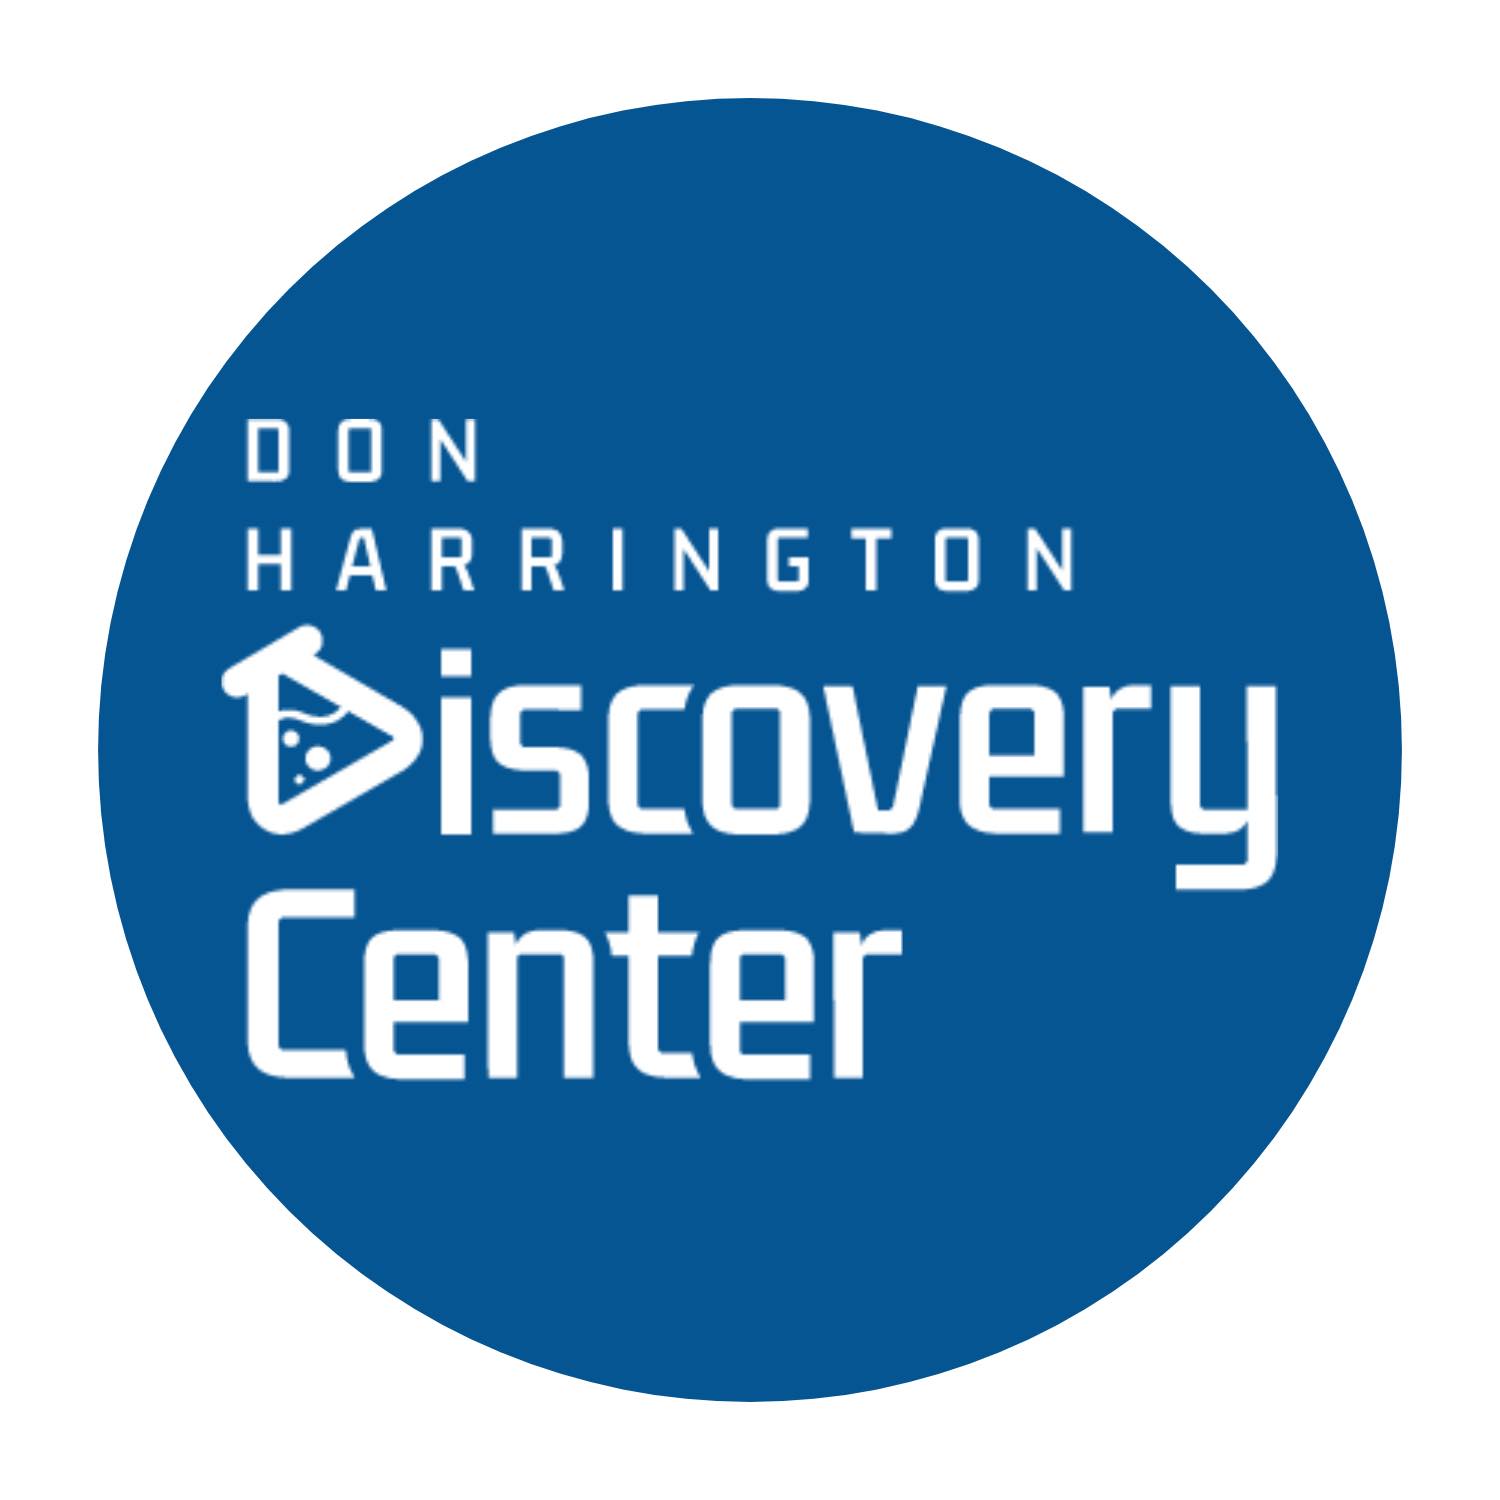 Don Harrington Discovery Center|Museums|Travel